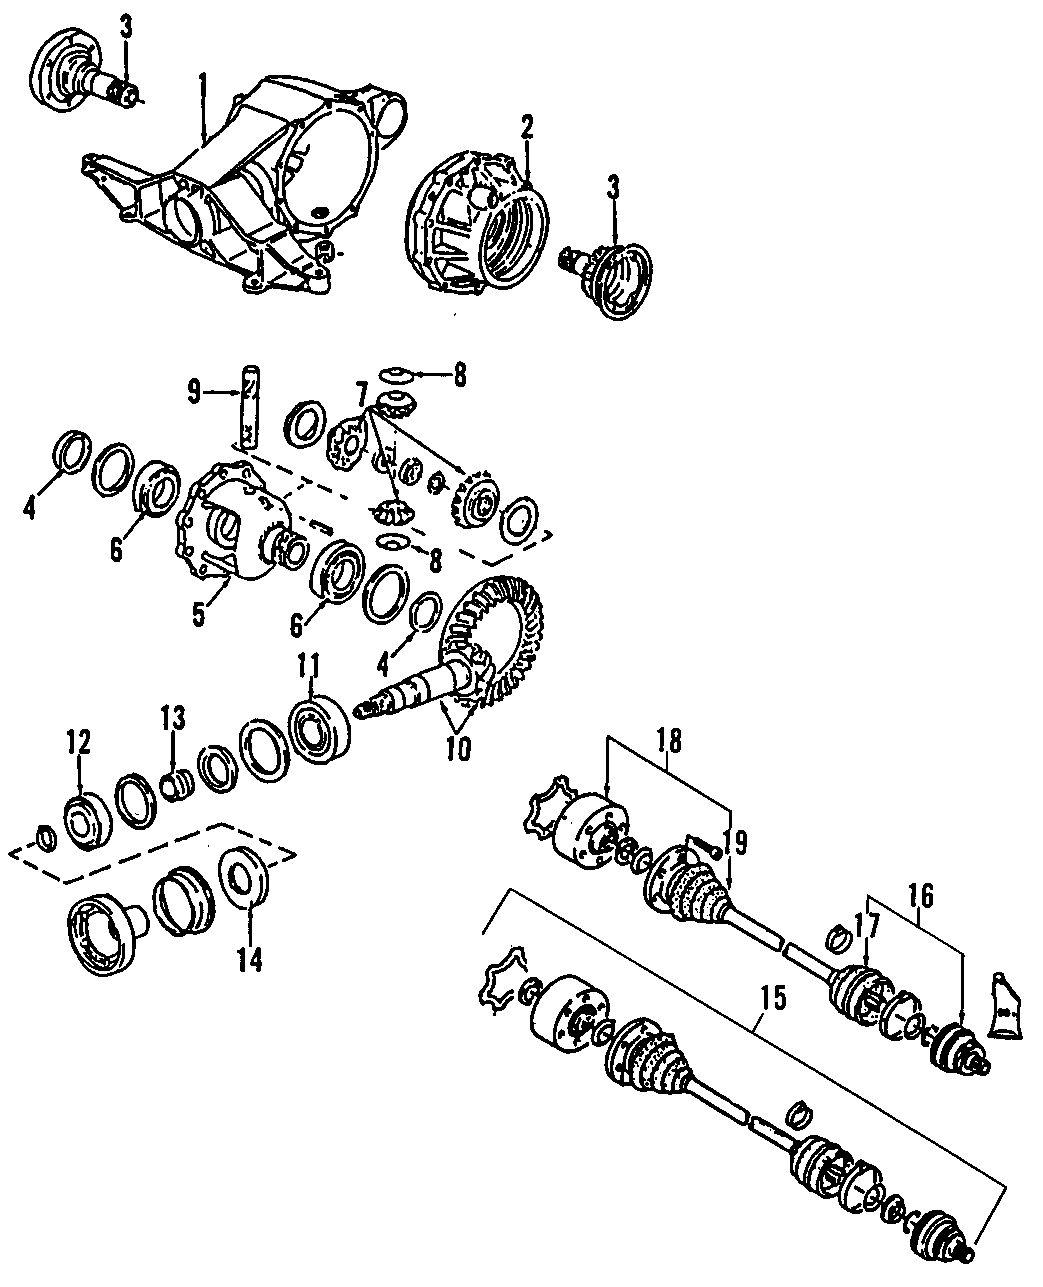 6DRIVE AXLES. REAR AXLE. AXLE SHAFTS & JOINTS. DIFFERENTIAL. PROPELLER SHAFT.https://images.simplepart.com/images/parts/motor/fullsize/F220090.png